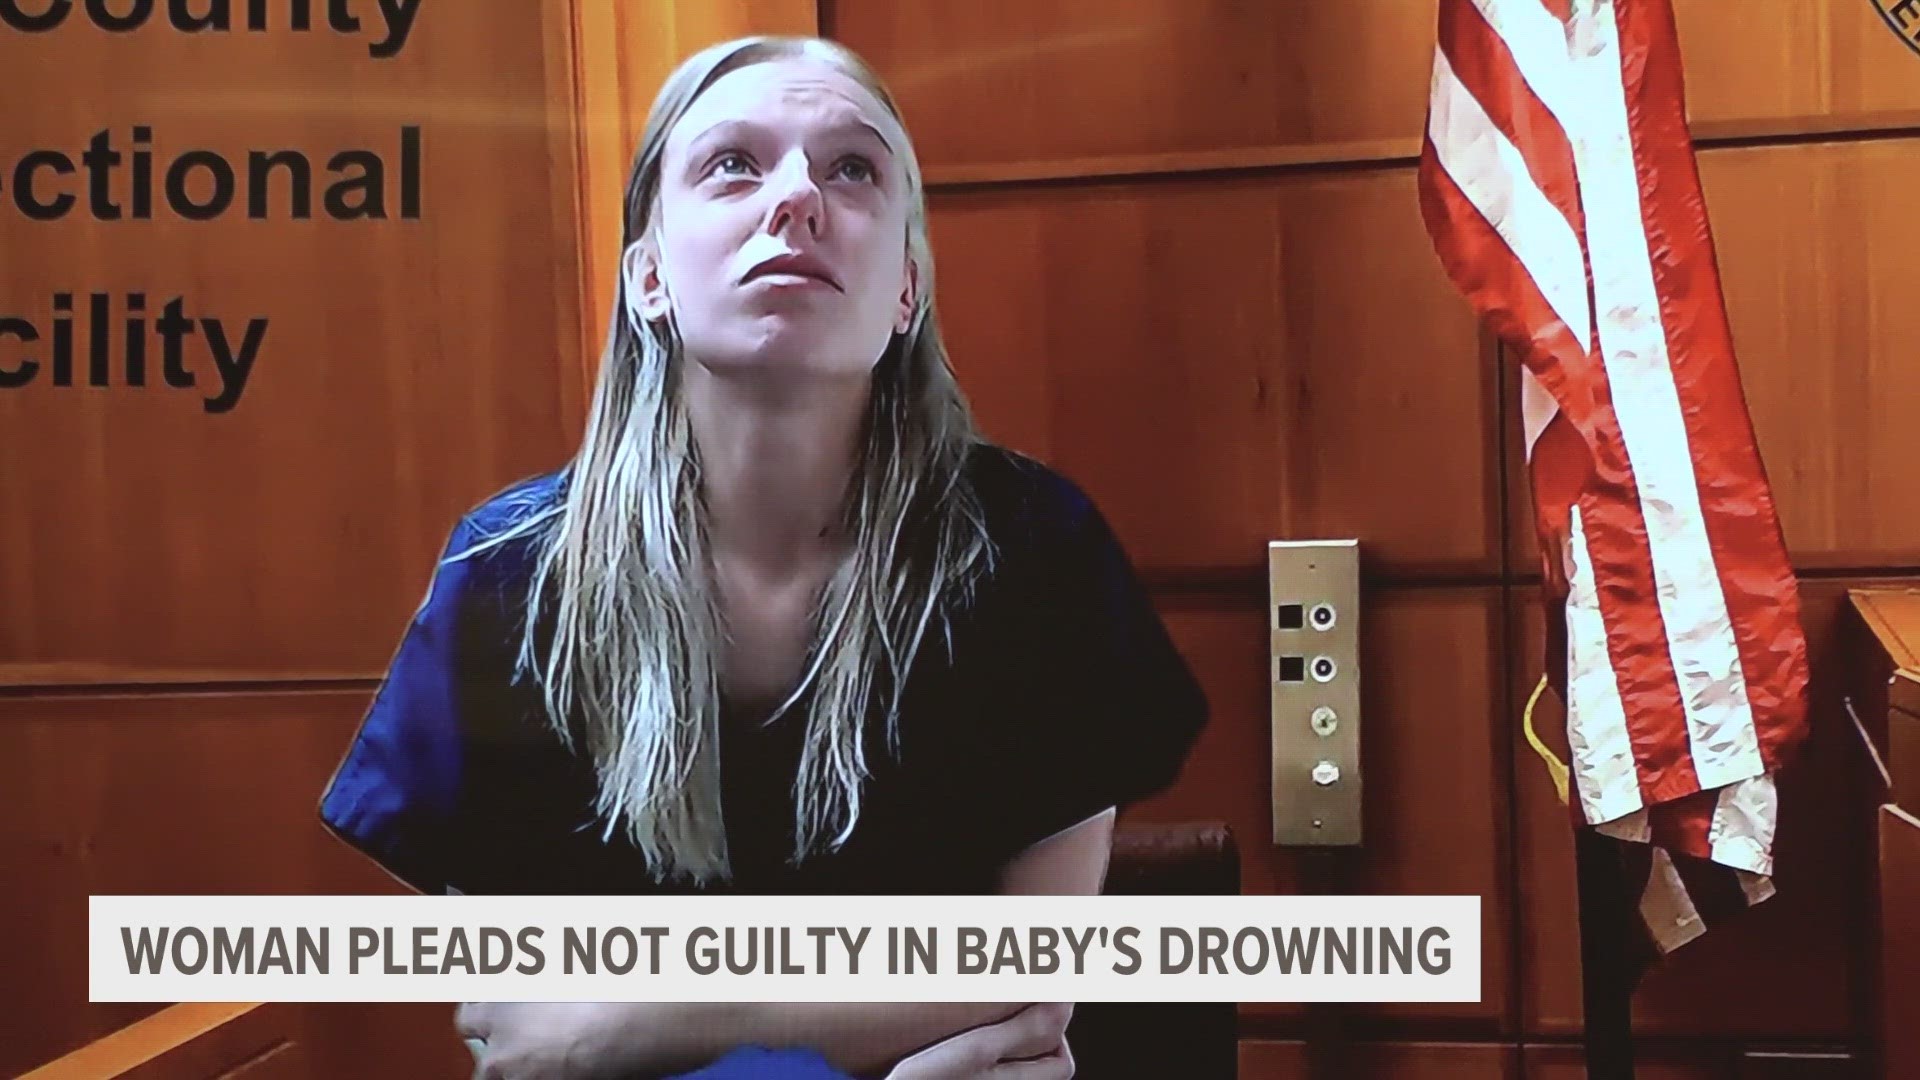 The mom was home alone with her baby at the time he died and throughout the investigation, police said she gave "varying stories" of what happened.